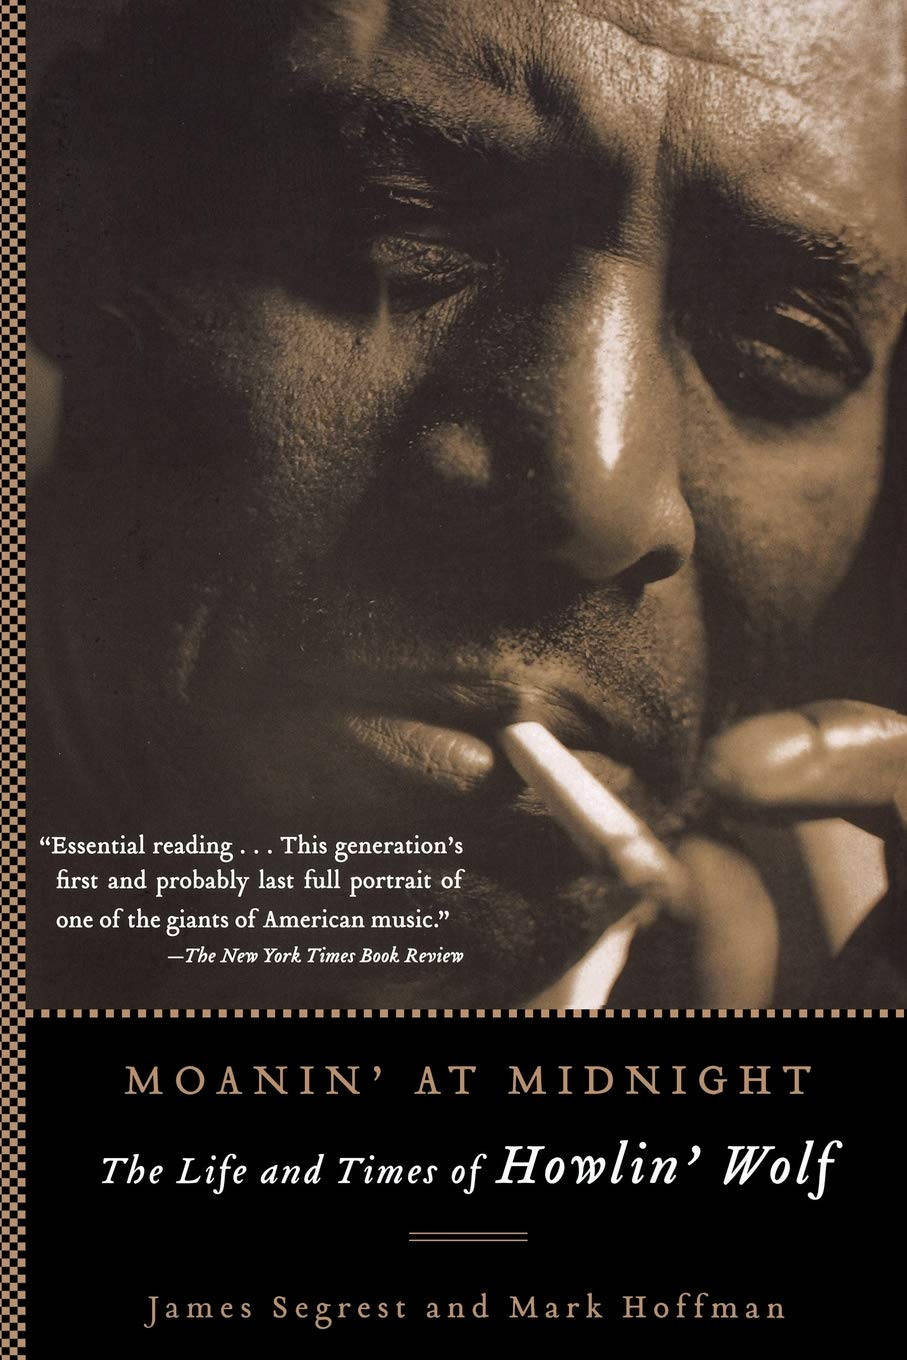 Howlin Wolf Moanin' At Midnight Biographical Book Cover Wallpaper